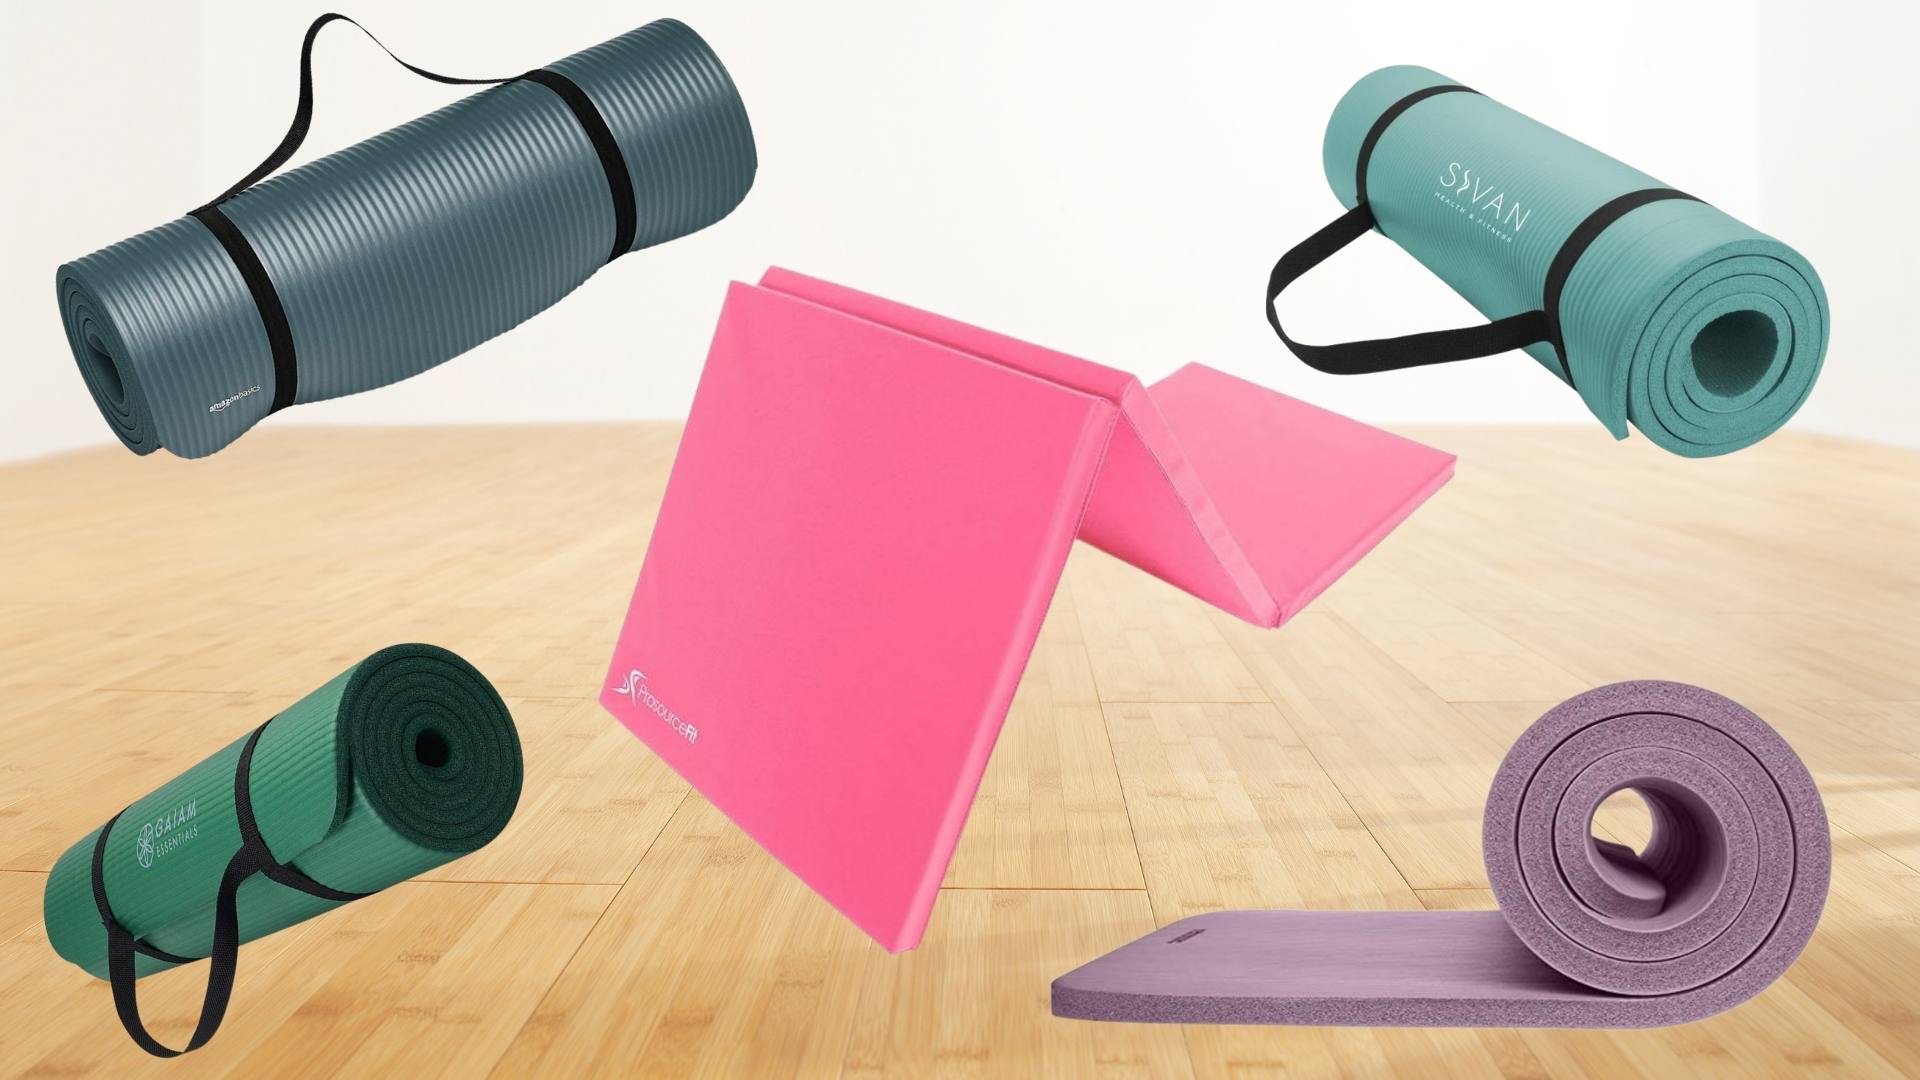 Yoga Mats are a Cheap, Easy Way to Give Old Dogs Traction on Slick Floors